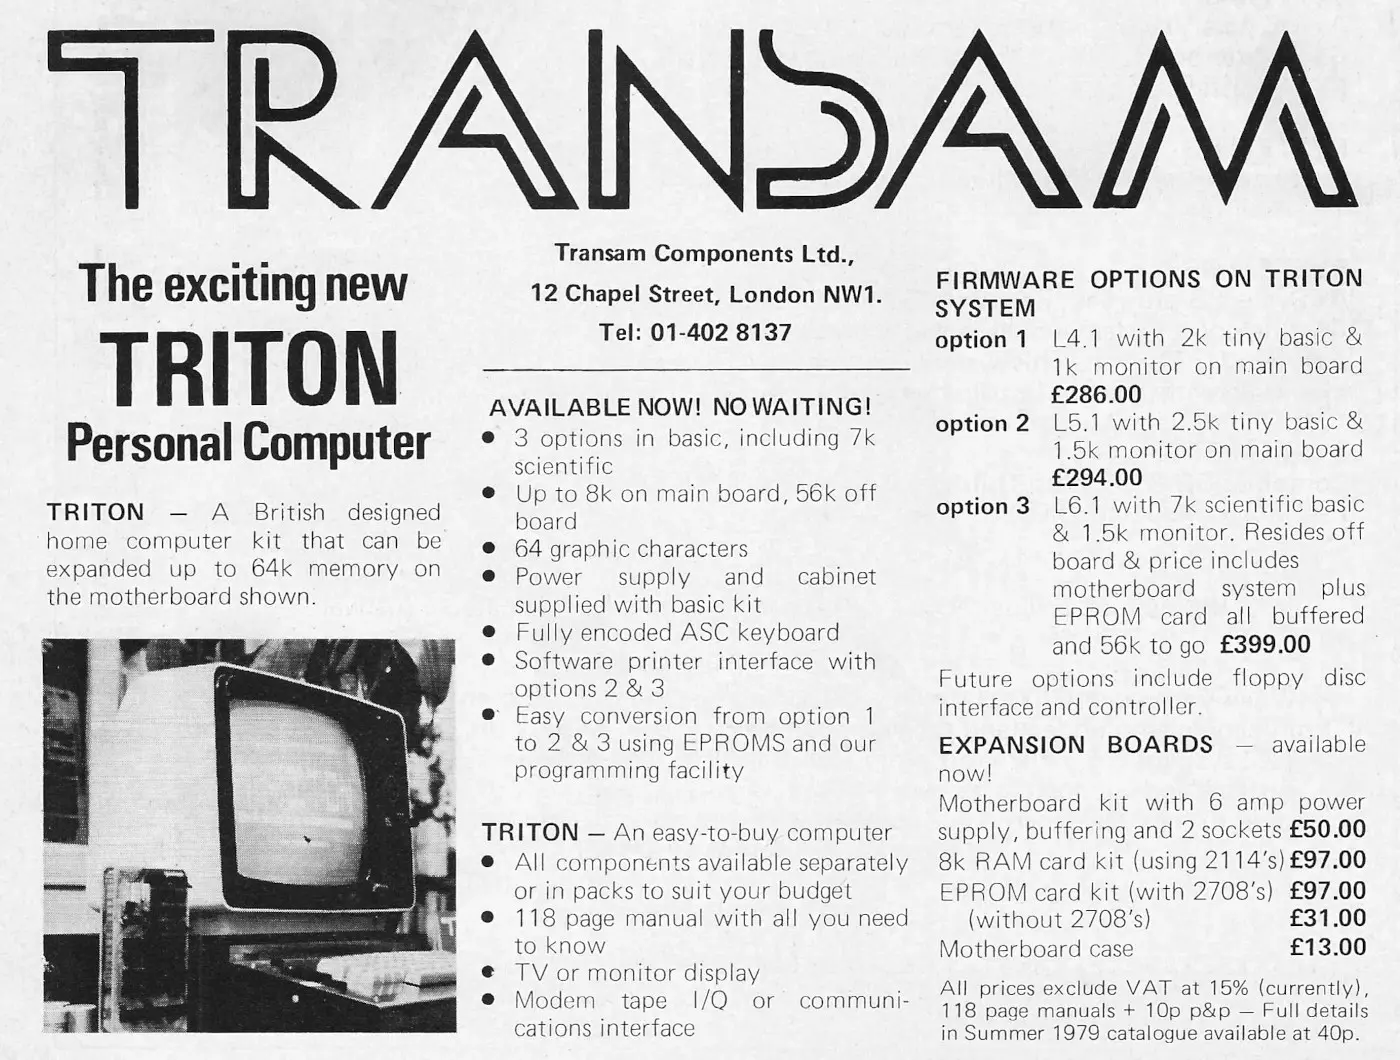 Transam Advert: Transam: The Exciting New Triton Personal Computer, from Personal Computer World, September 1979